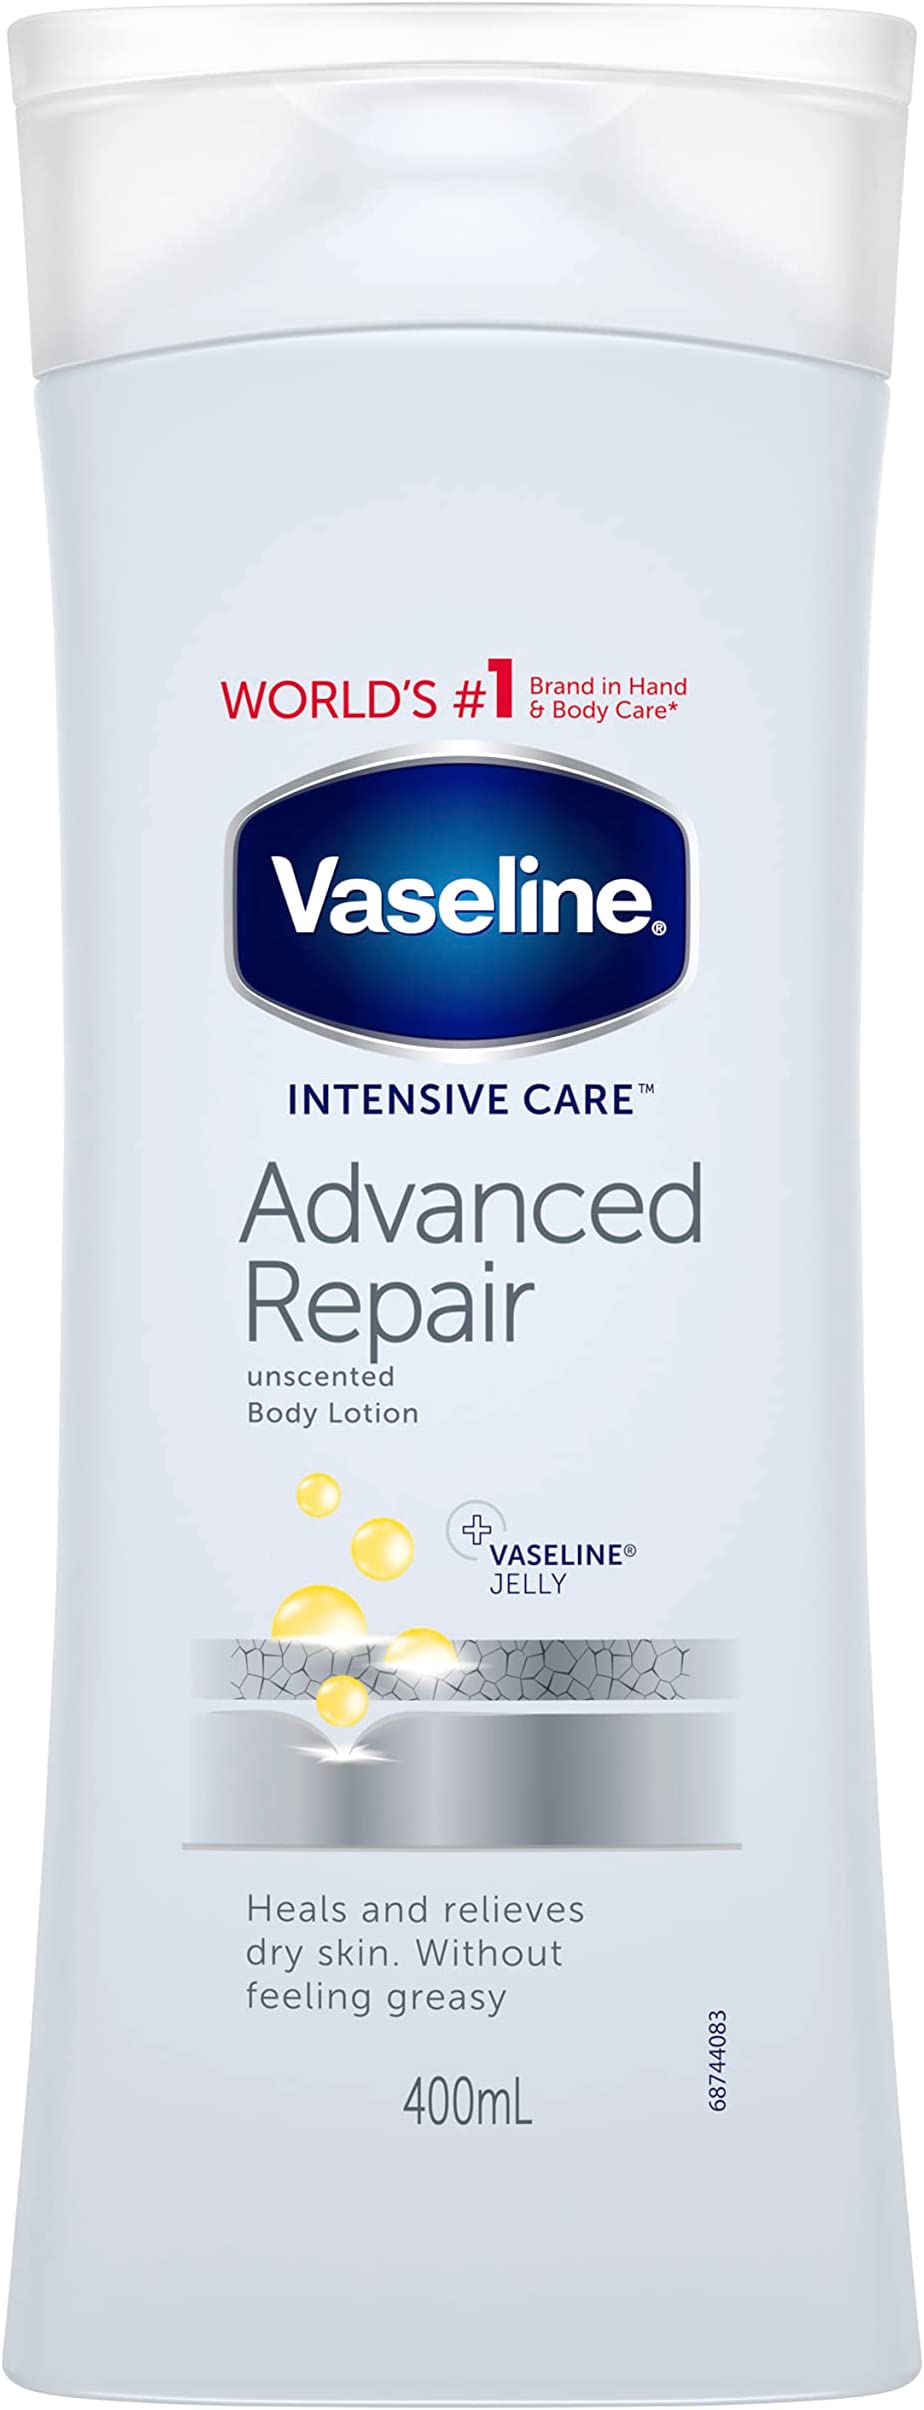 Image of Vaseline Intensive Care Intensive care fragrance-free Body Lotion to heal very dry skin 400ml